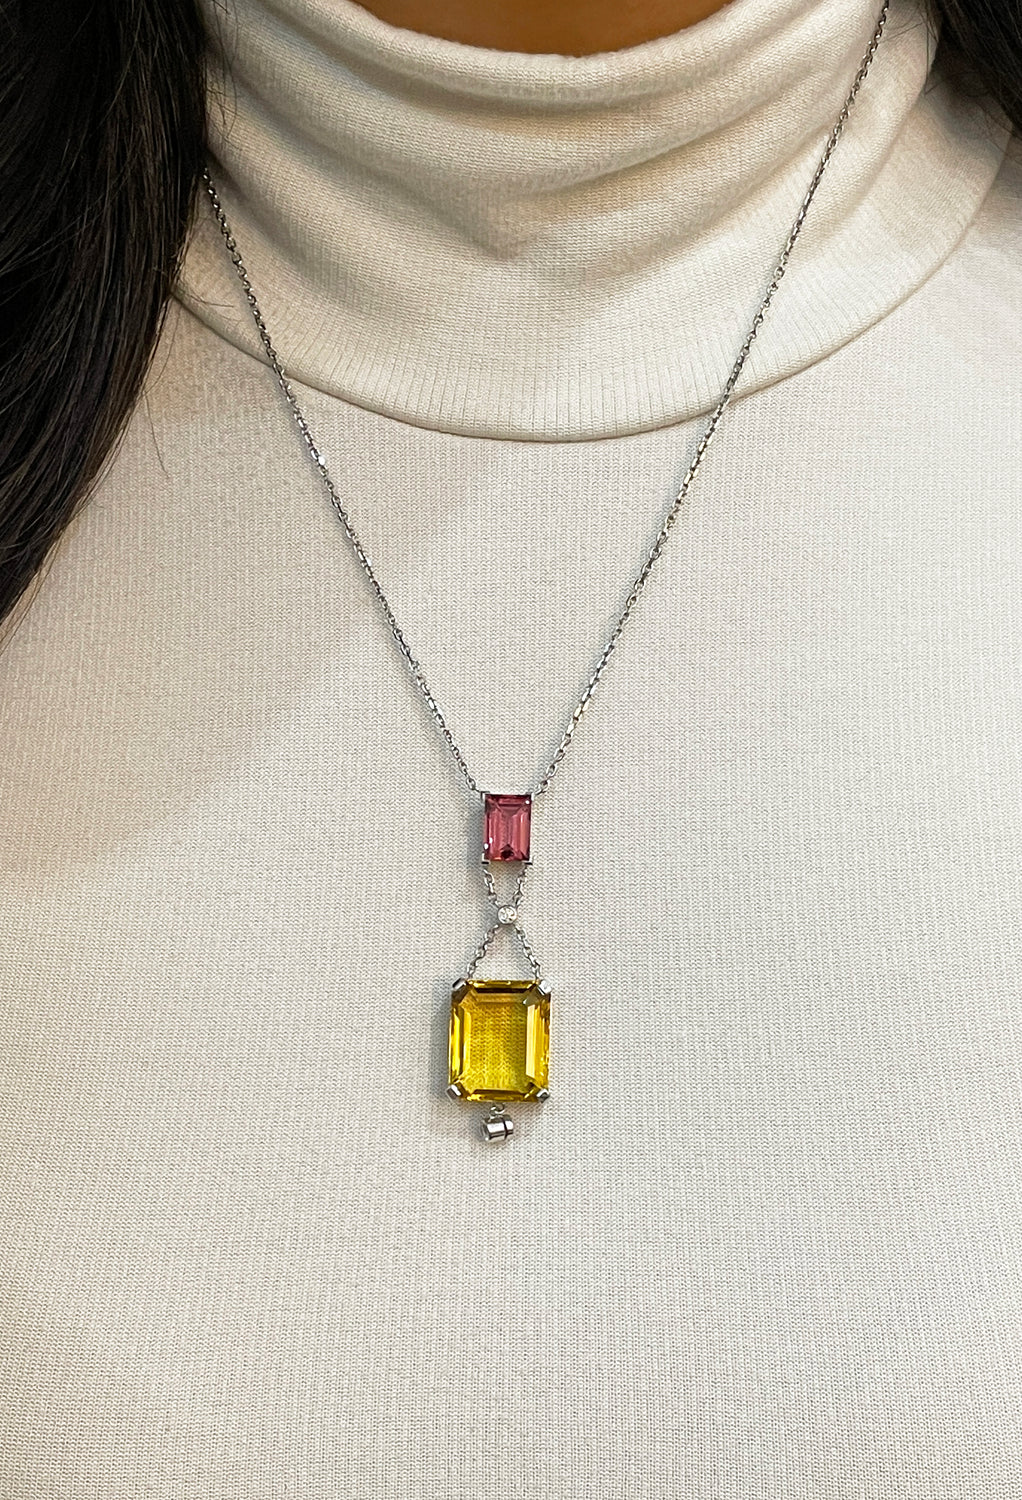 Diamond, Yellow Beryl and Pink Spinel 18 Carat White Gold Pendant Necklace